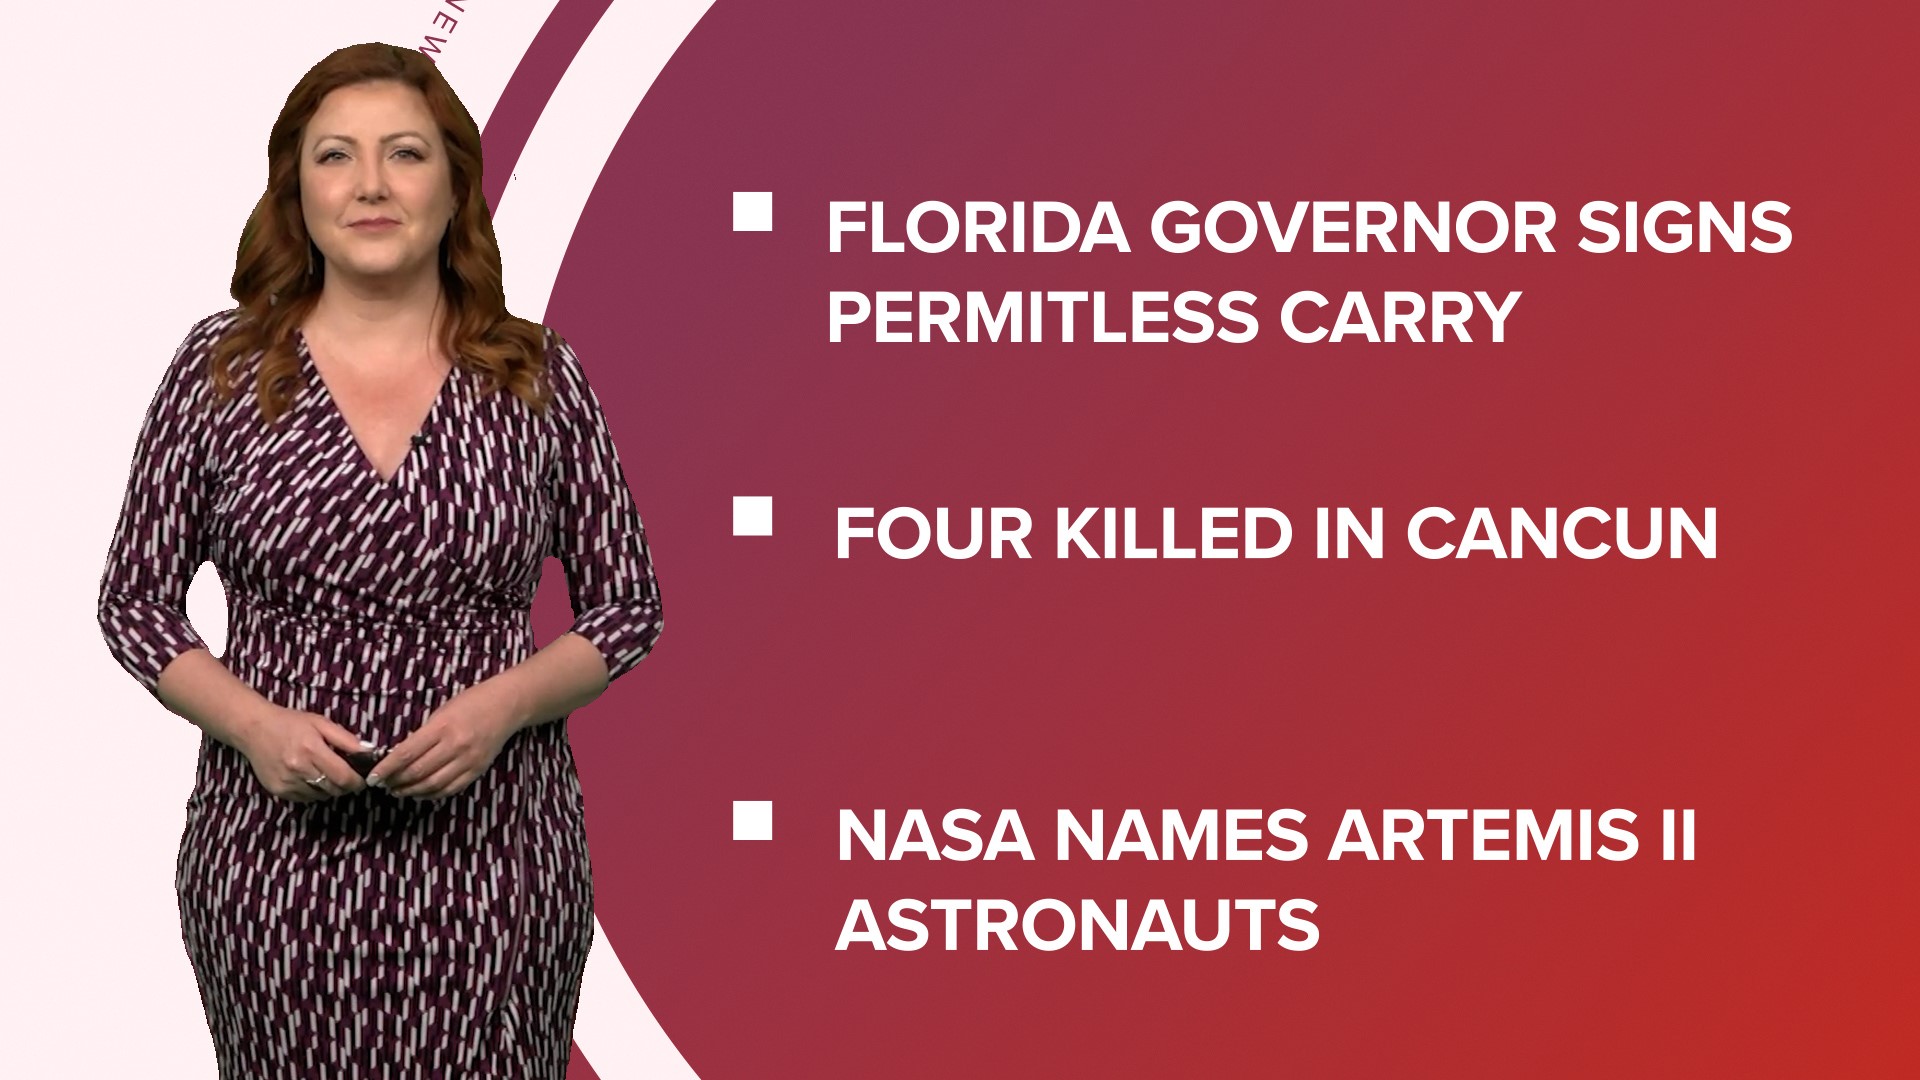 A look at what is happening in the news from a new gun law allowing permitless carry in Florida to NASA naming the Artemis II astronauts and UConn winning the title.